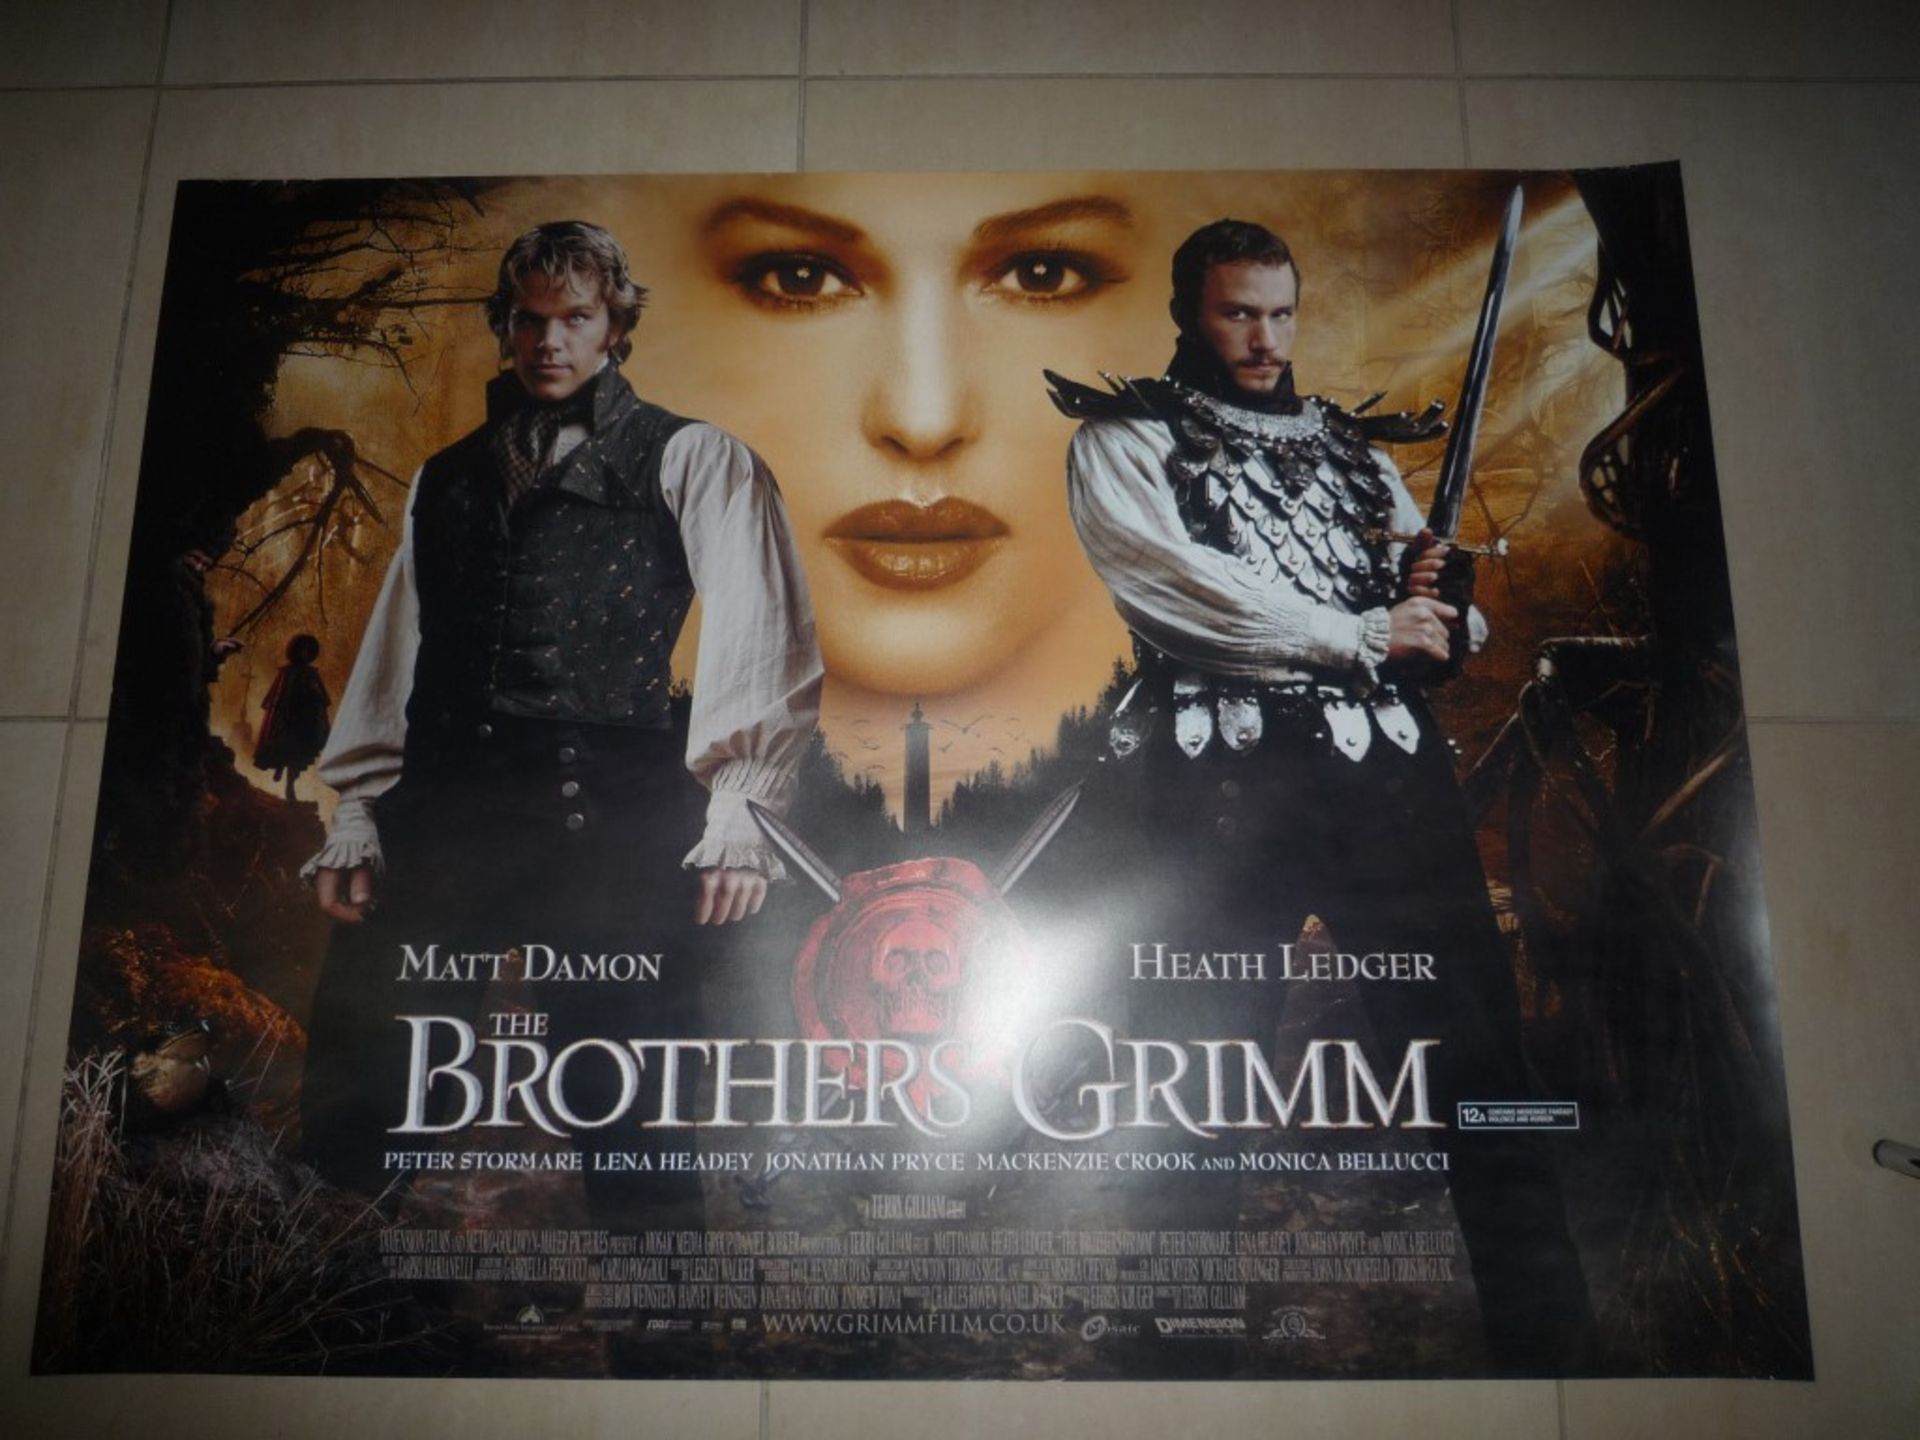 The Brothers Grim Damon/Ledger poster